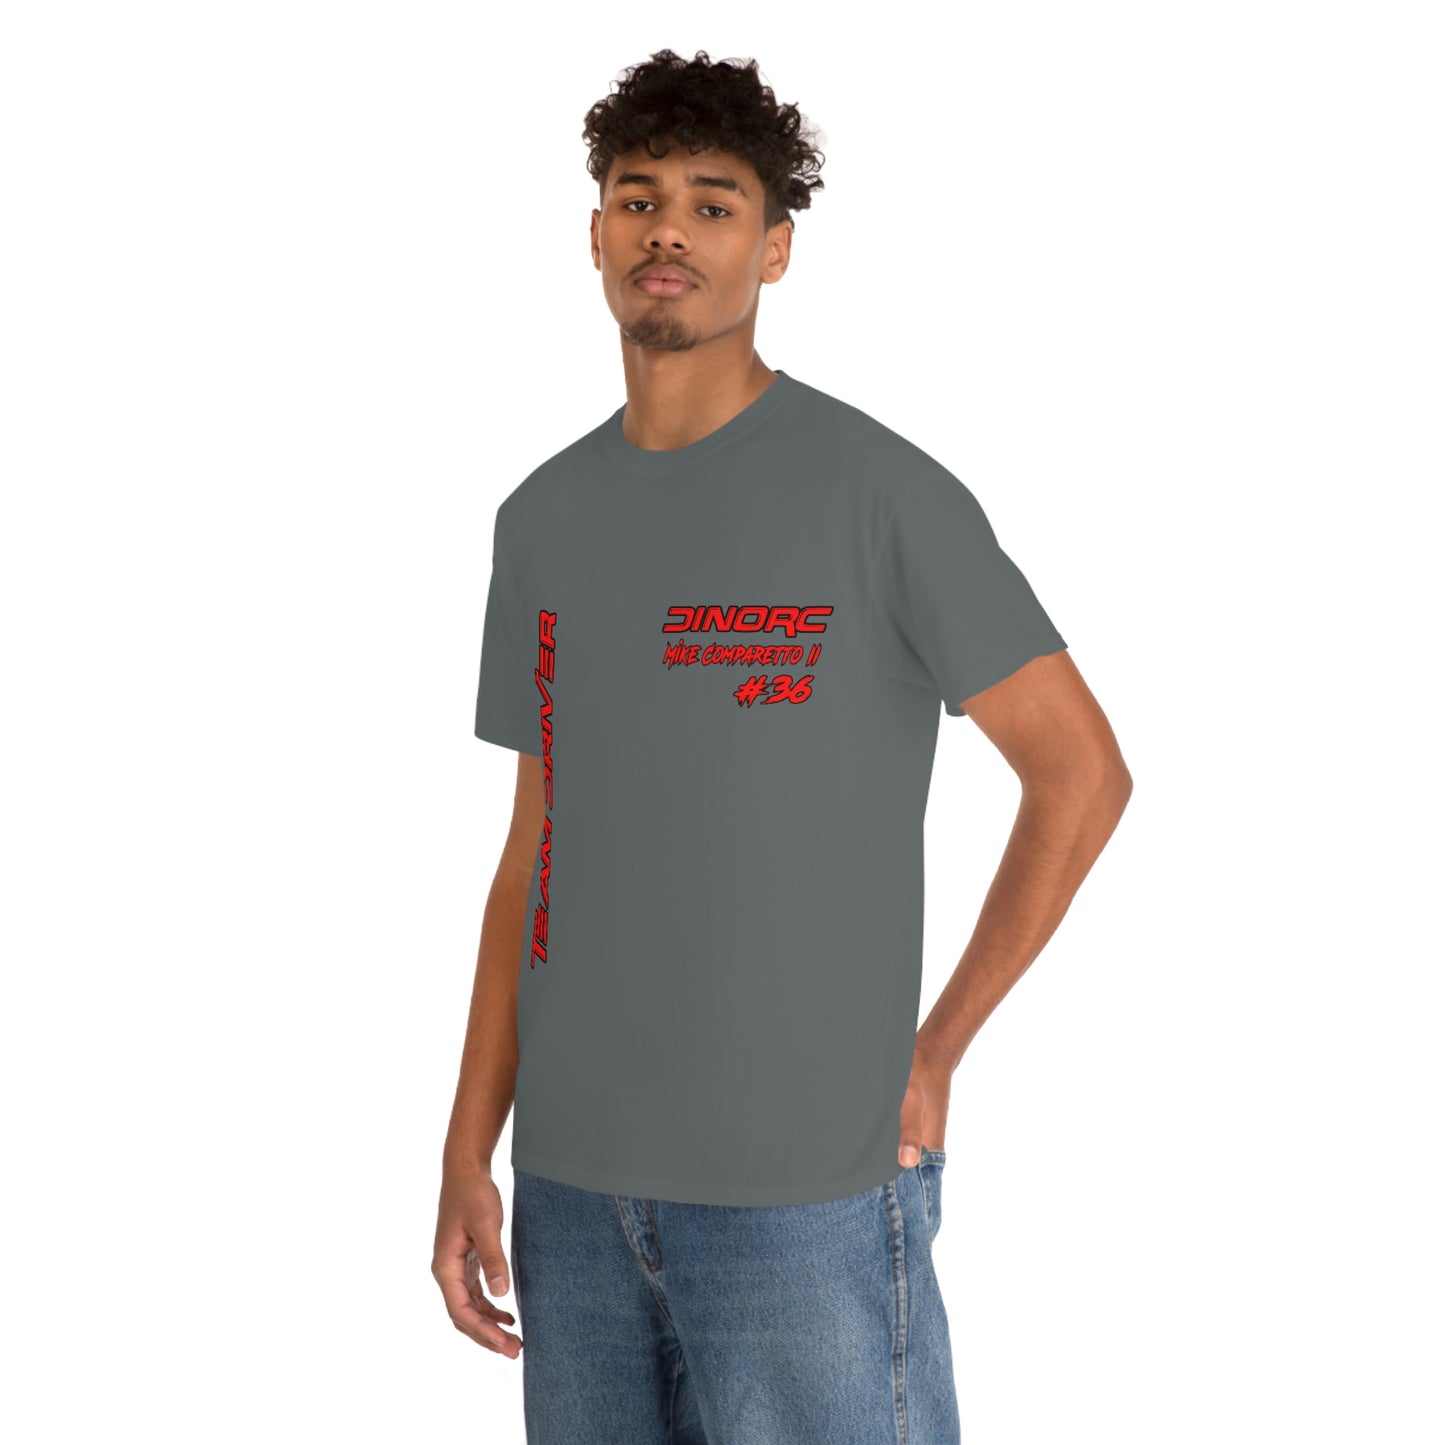 Team Driver Mike Comparetto II Front and Back DinoRc Logo T-Shirt S-5x 5 colors